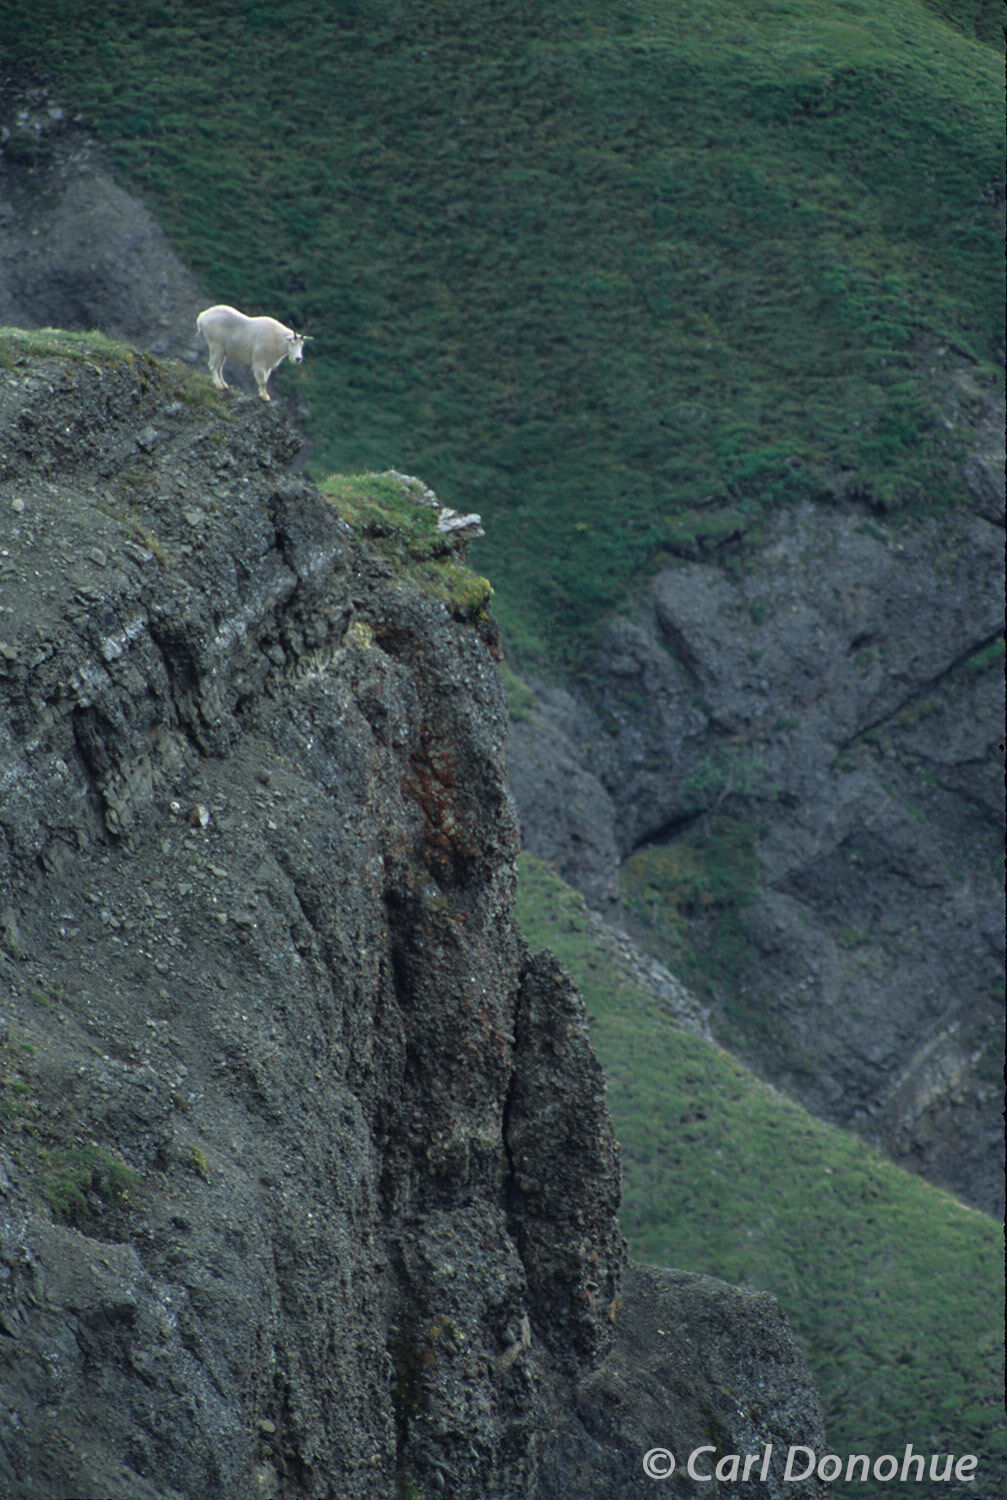 The agile mountain goat deftly navigates the rocky terrain of Wrangell-St. Elias National Park, its hooves providing a sure footing...